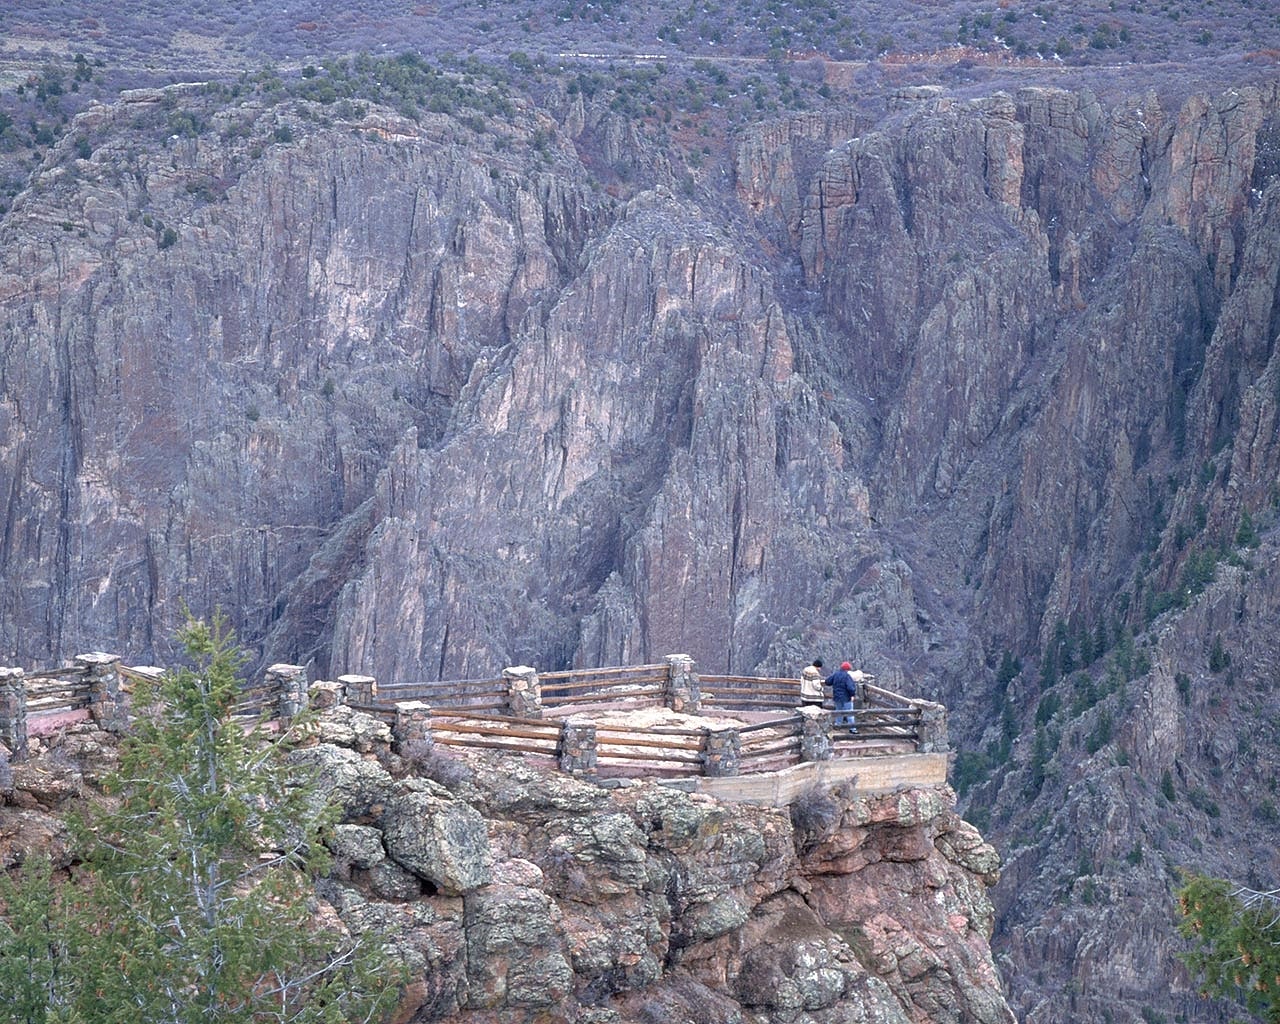 Black Canyon of the Gunnison National Park, United States